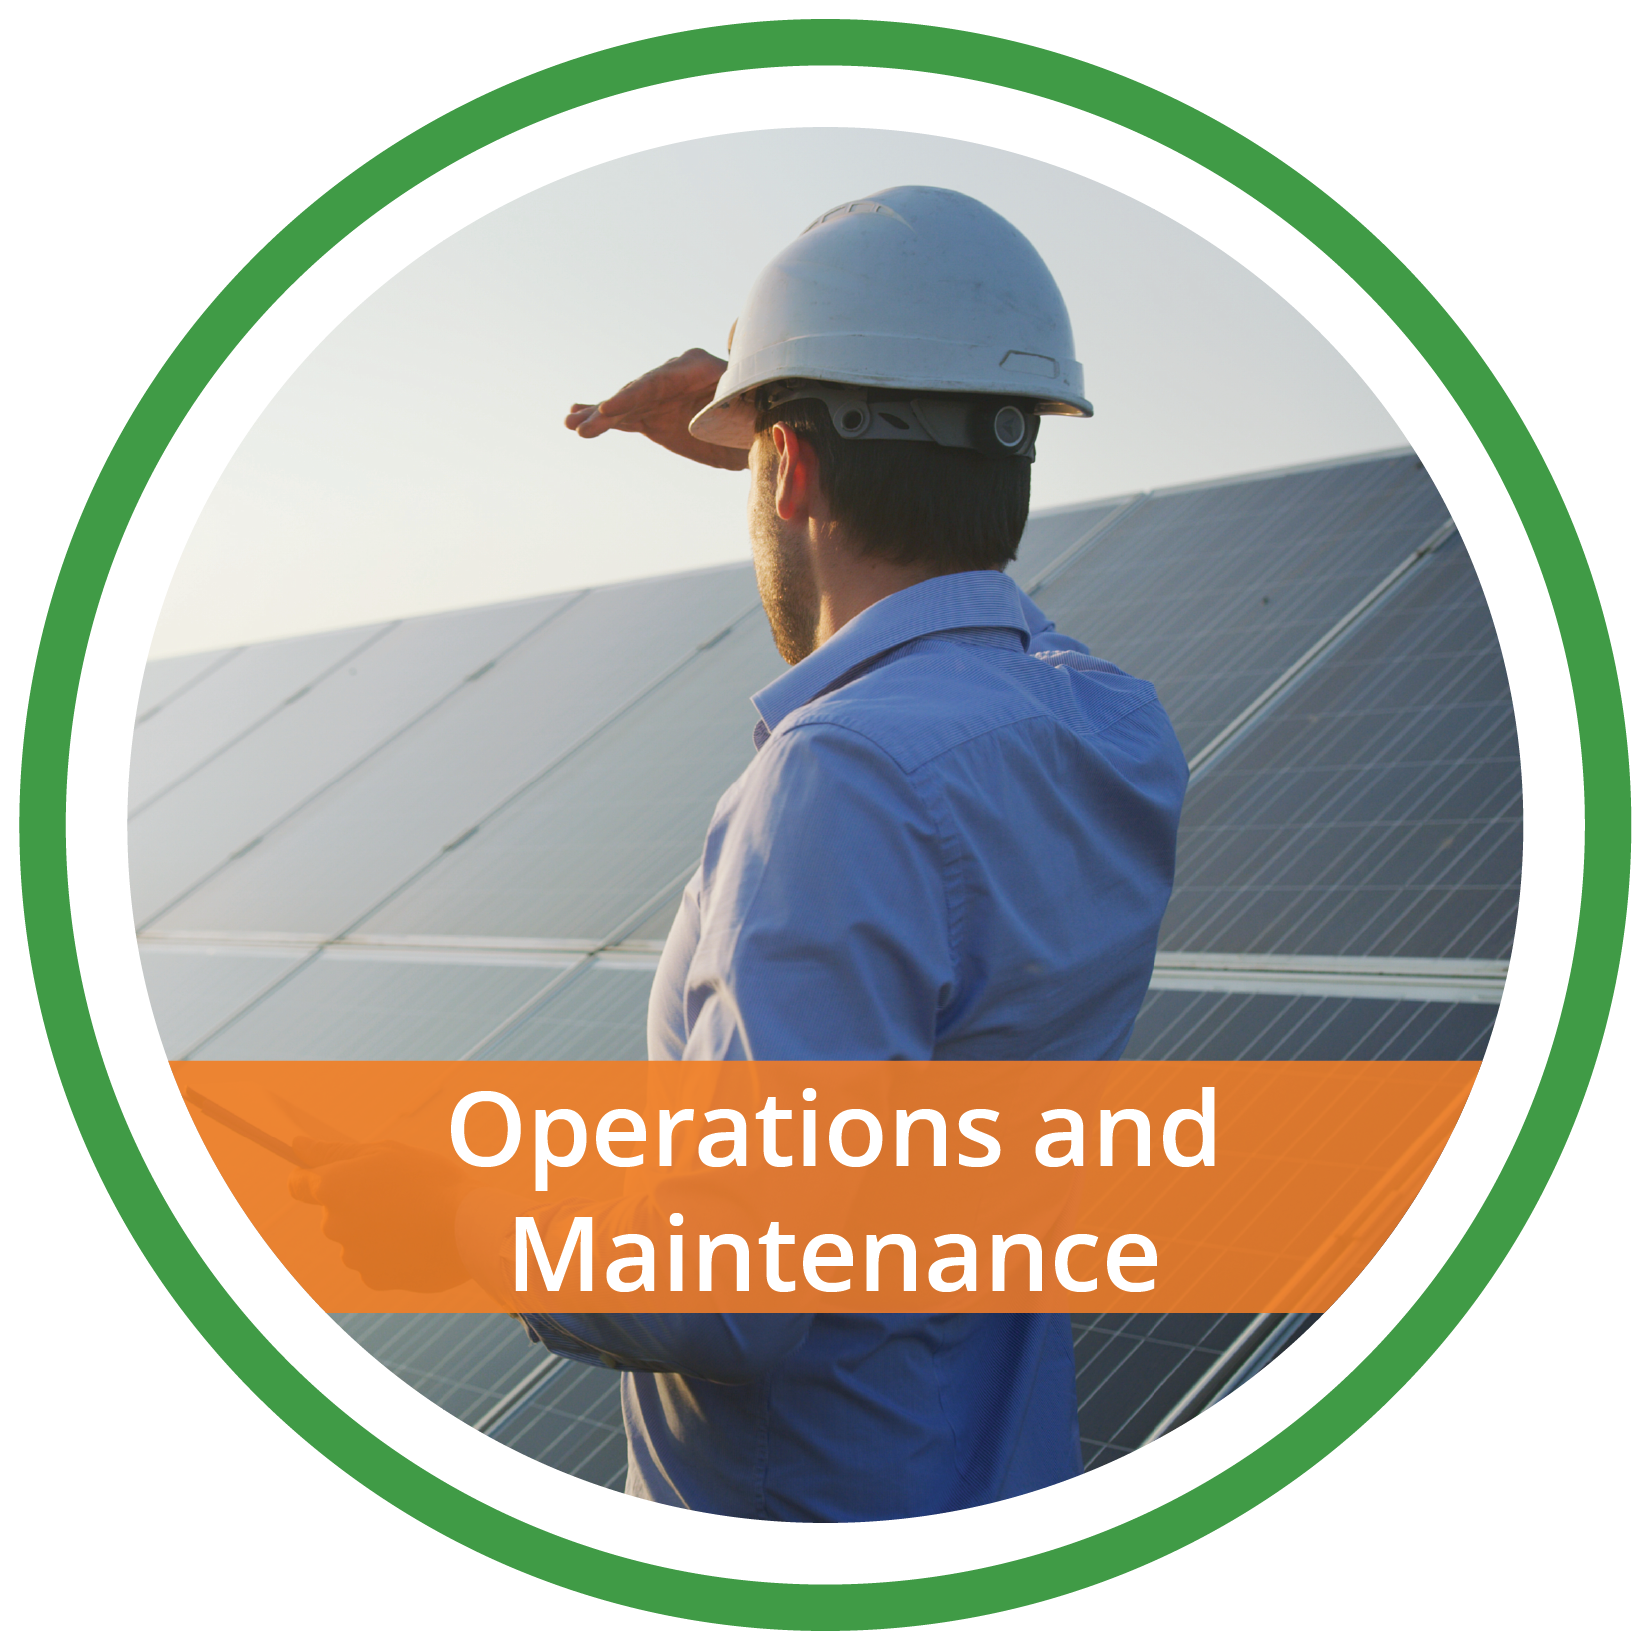 Operations and Maintenance for Solar array